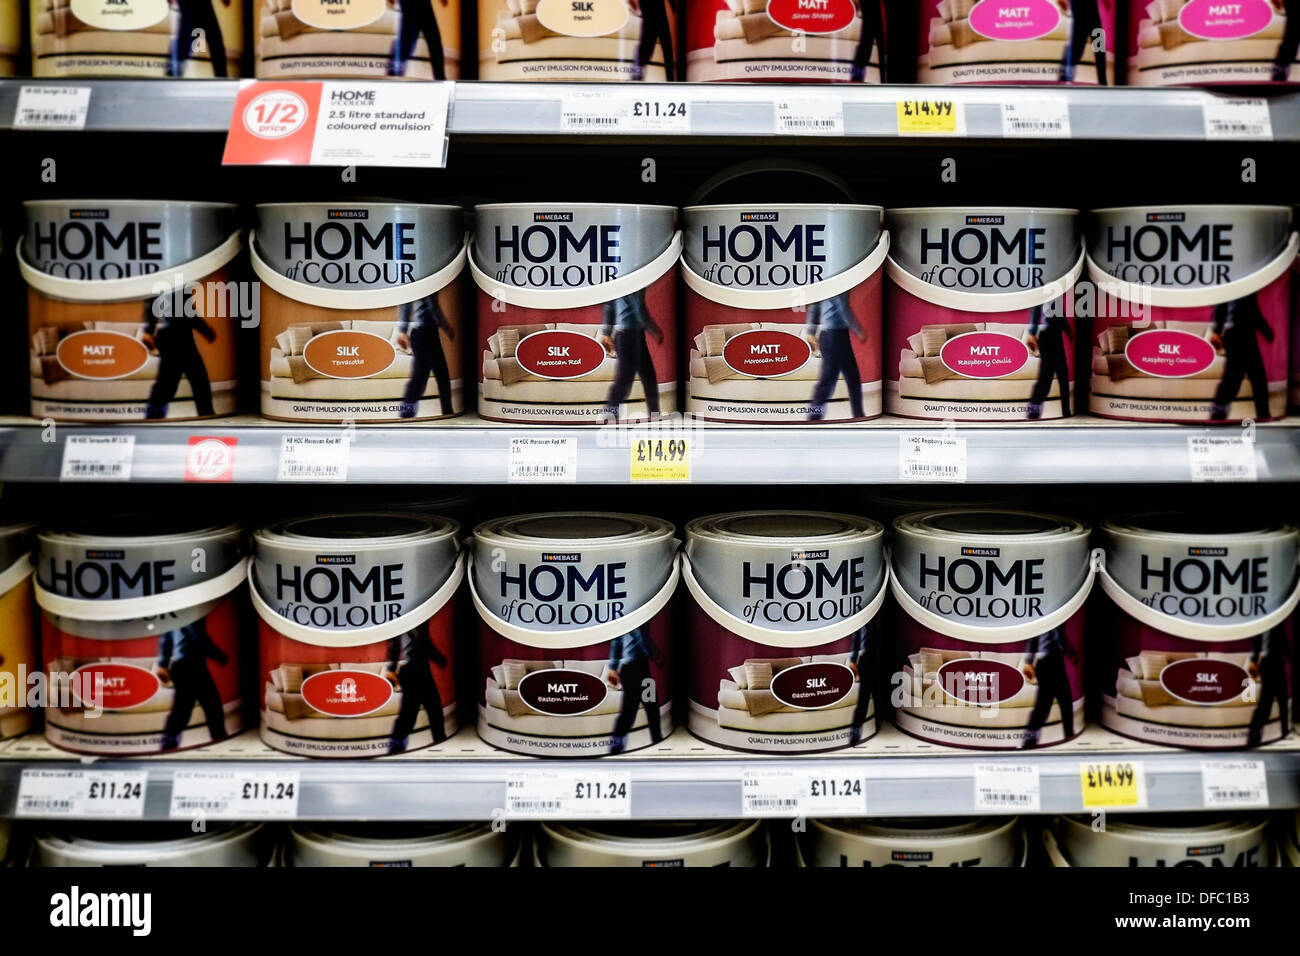 Shelves of tins of paint. Stock Photo